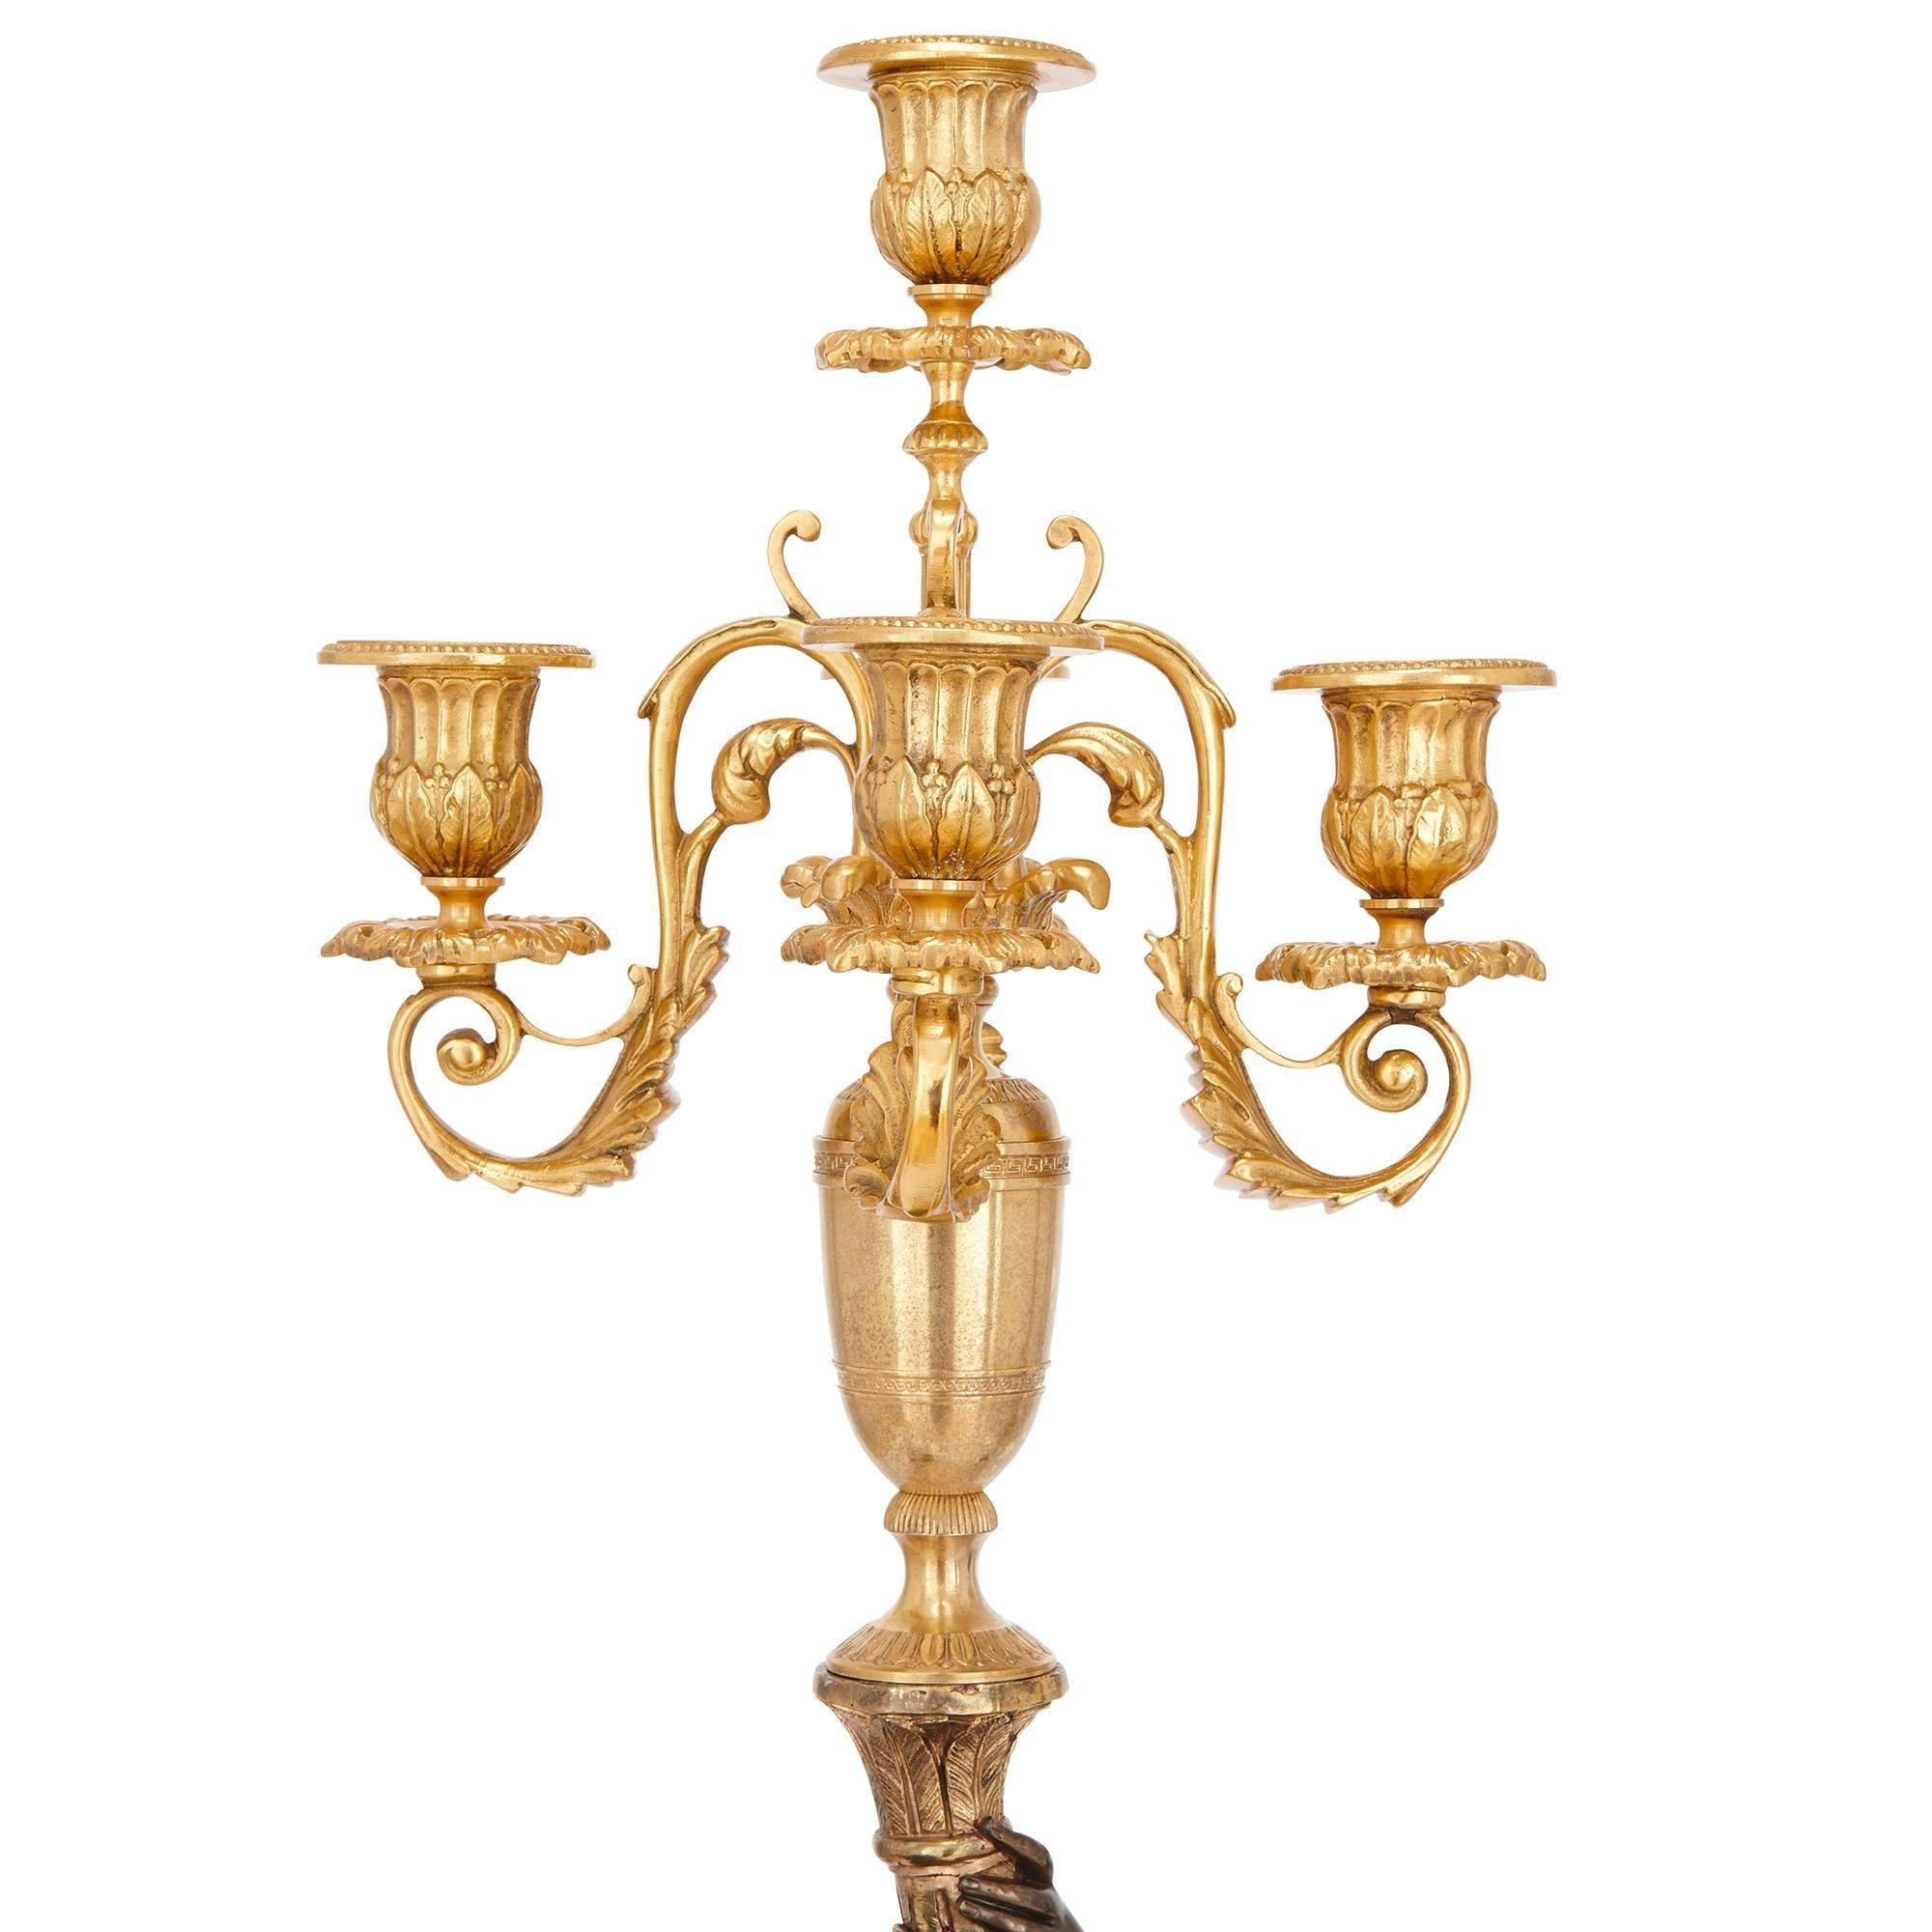 Pair of Large Neoclassical Style Gilt and Patinated Bronze Candelabra by Picard 1